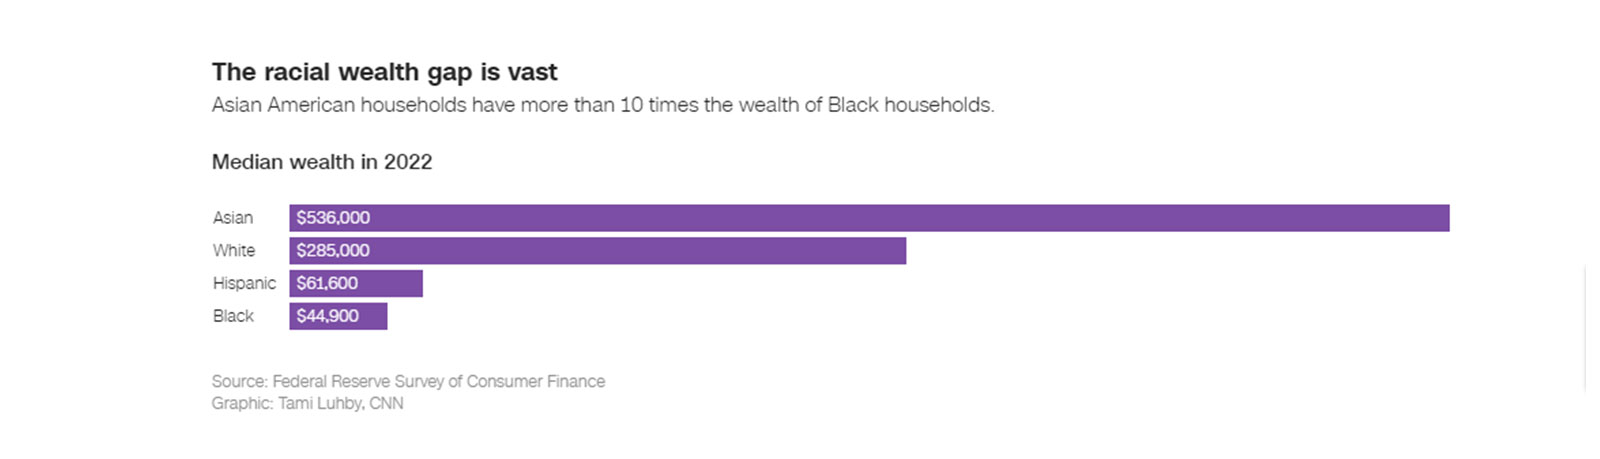 The racial wealth gap is vast. Asian American households have more than 10 times the wealth of Black households. Median wealth in 2022: